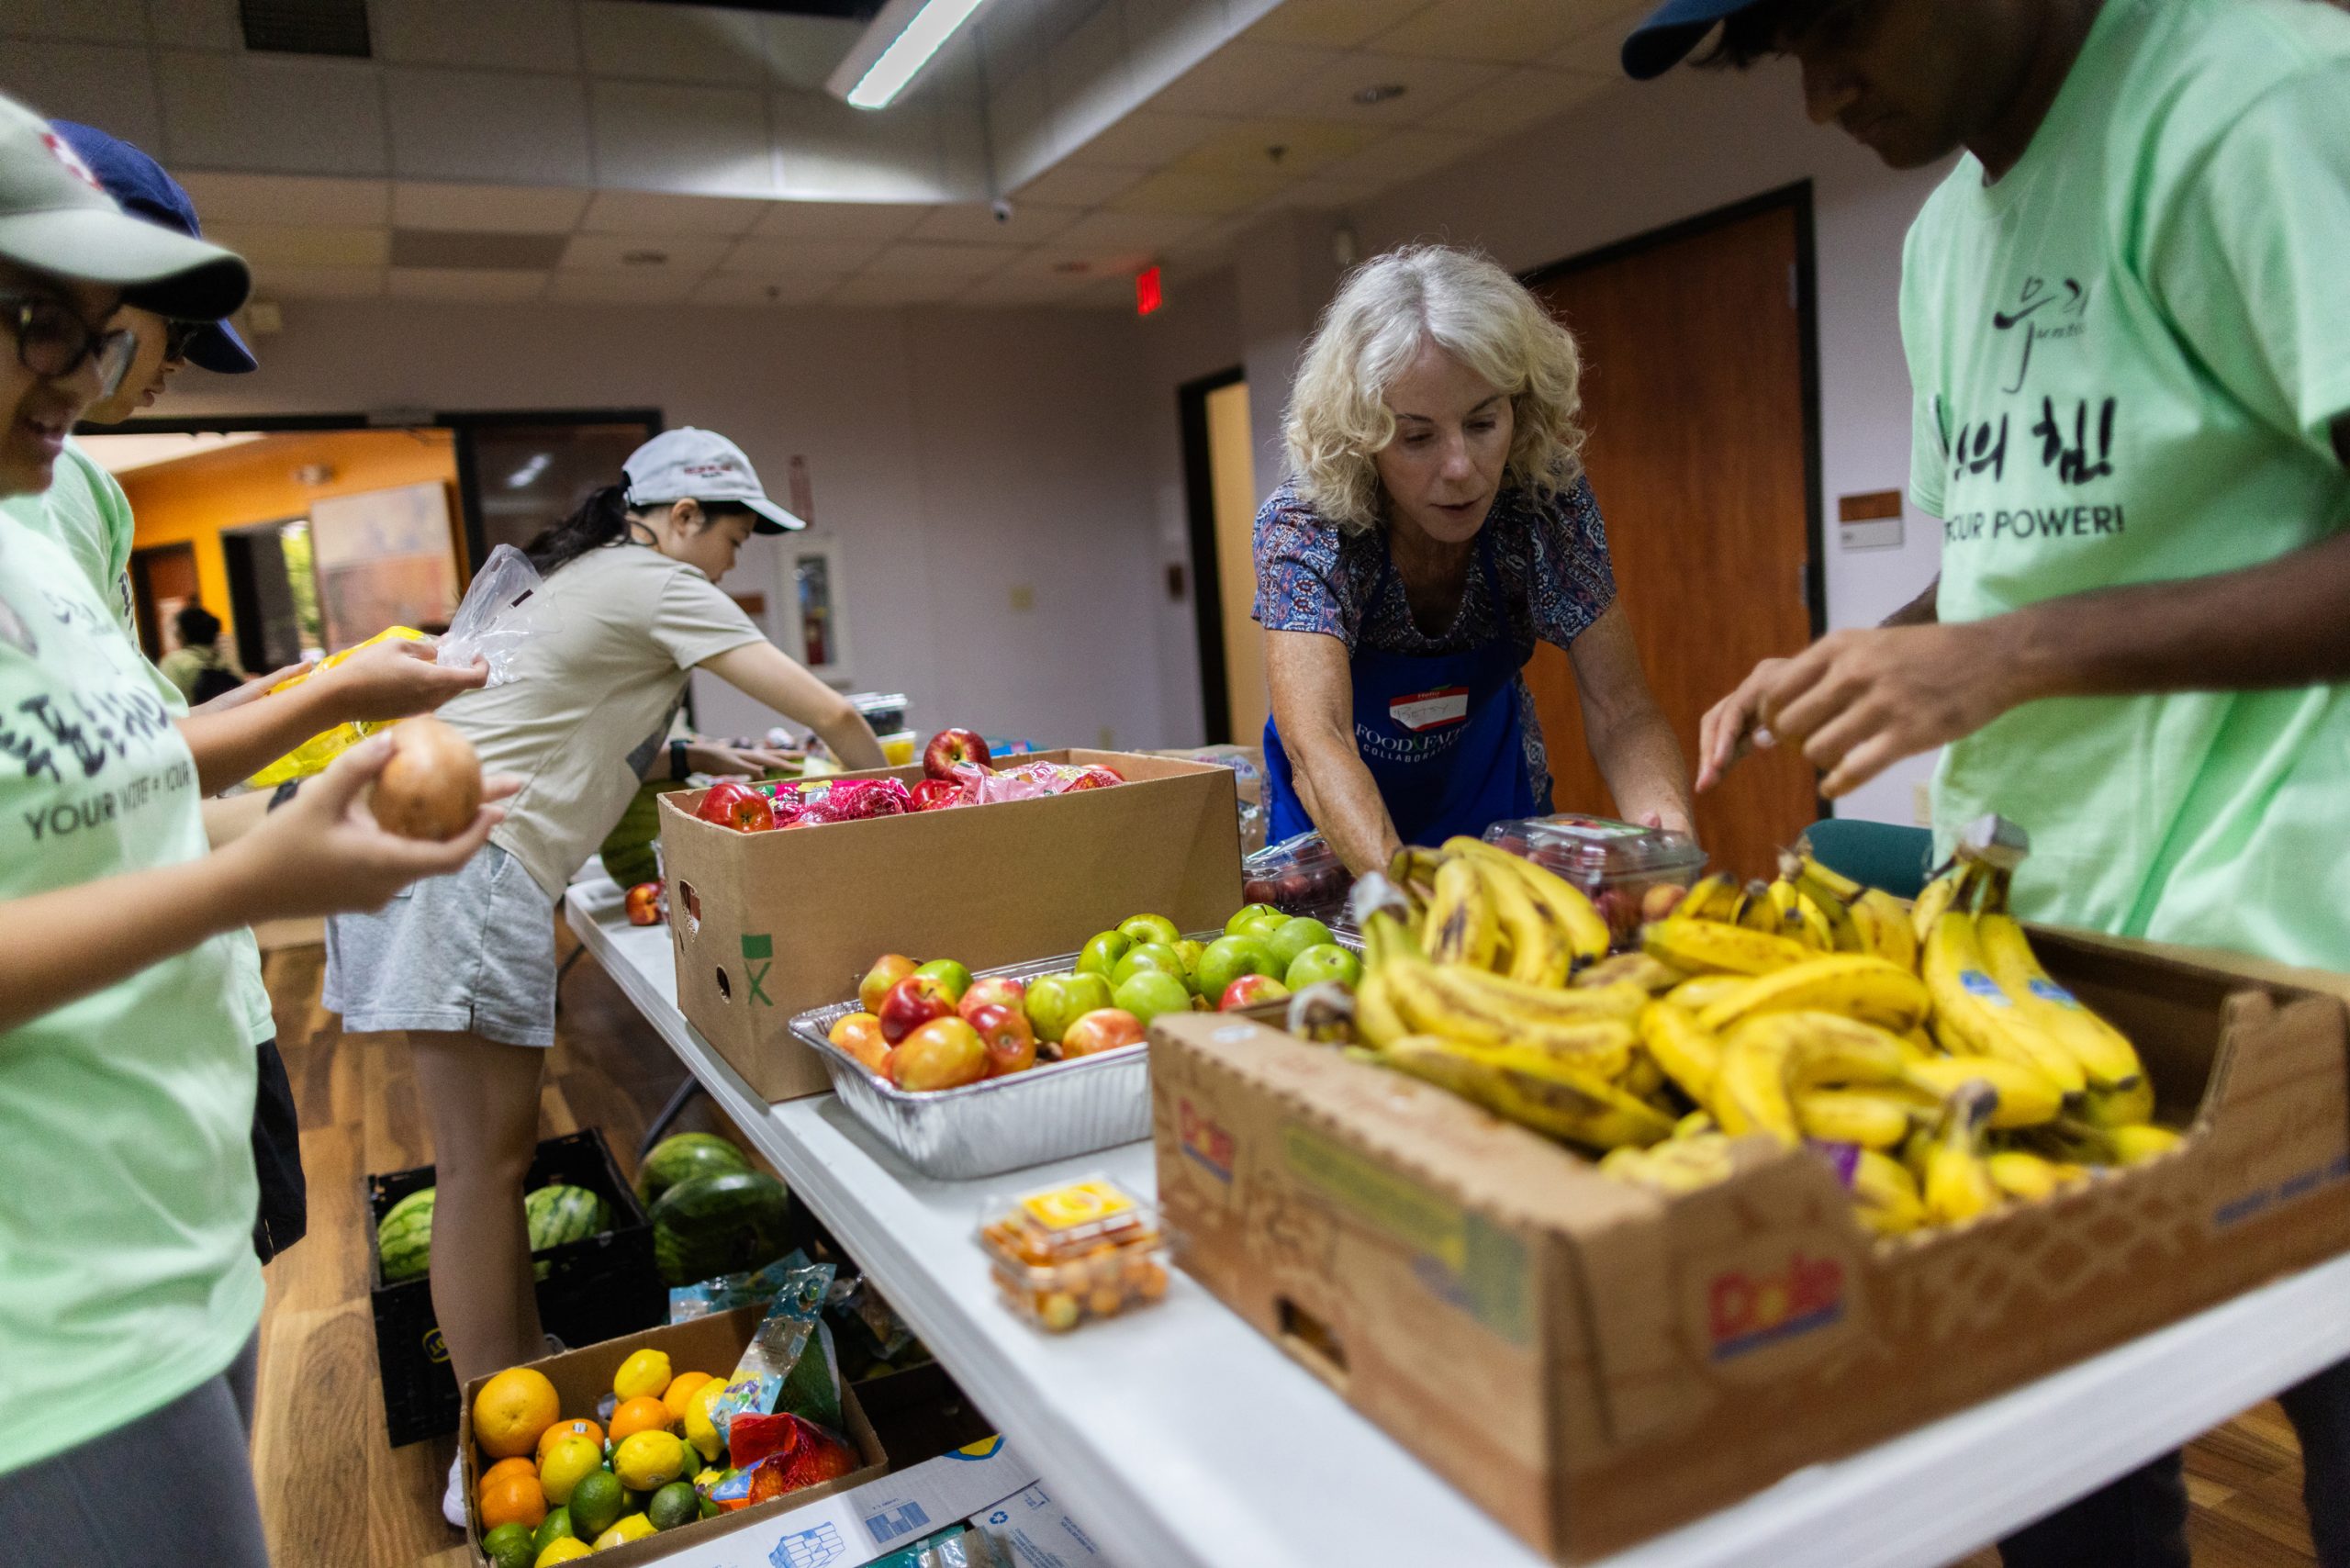 Volunteer Betsy Torrence, center, helps place fresh produce on a table to make the food presentable